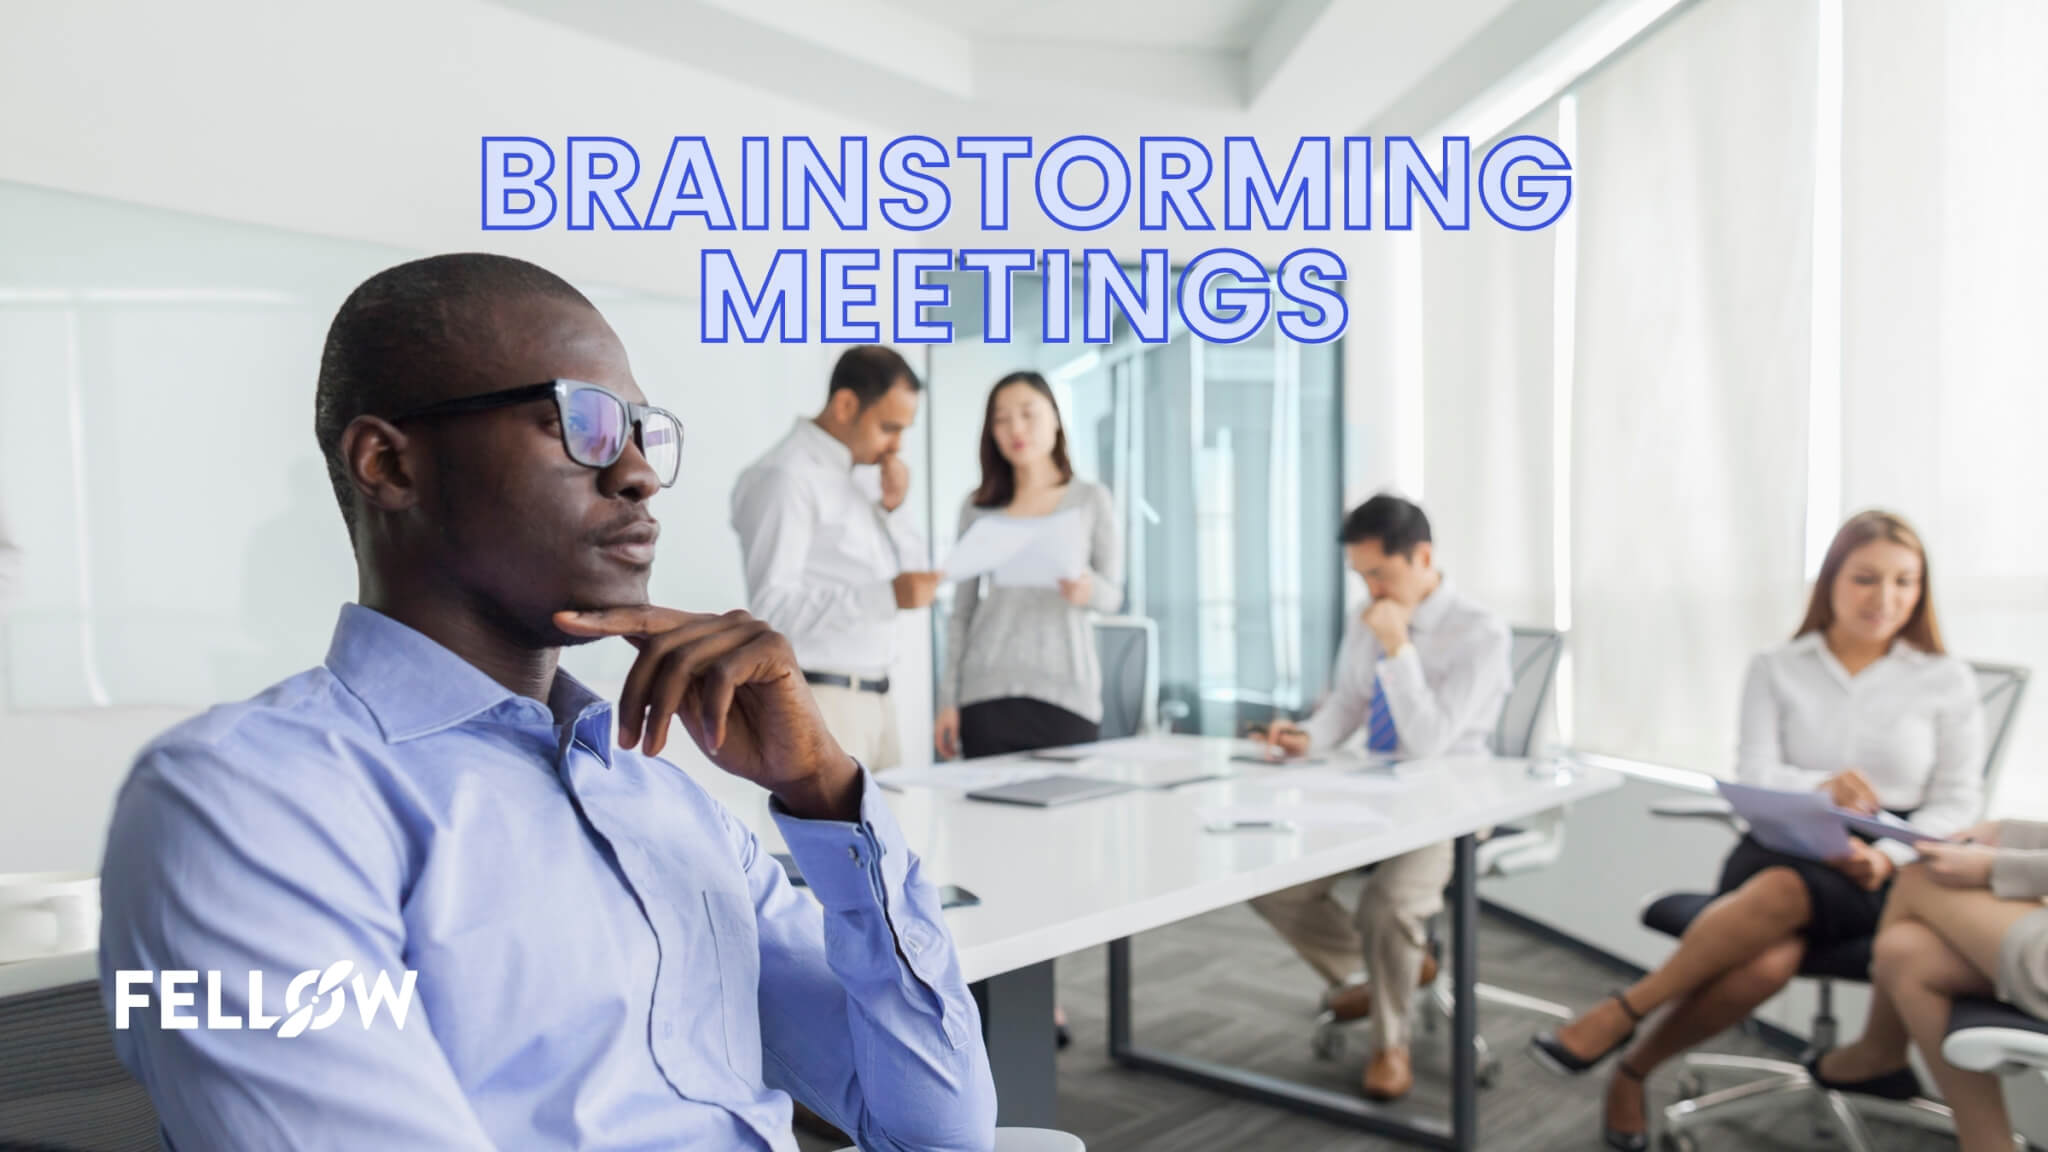 Start your group #brainstorm session on the right foot with fun